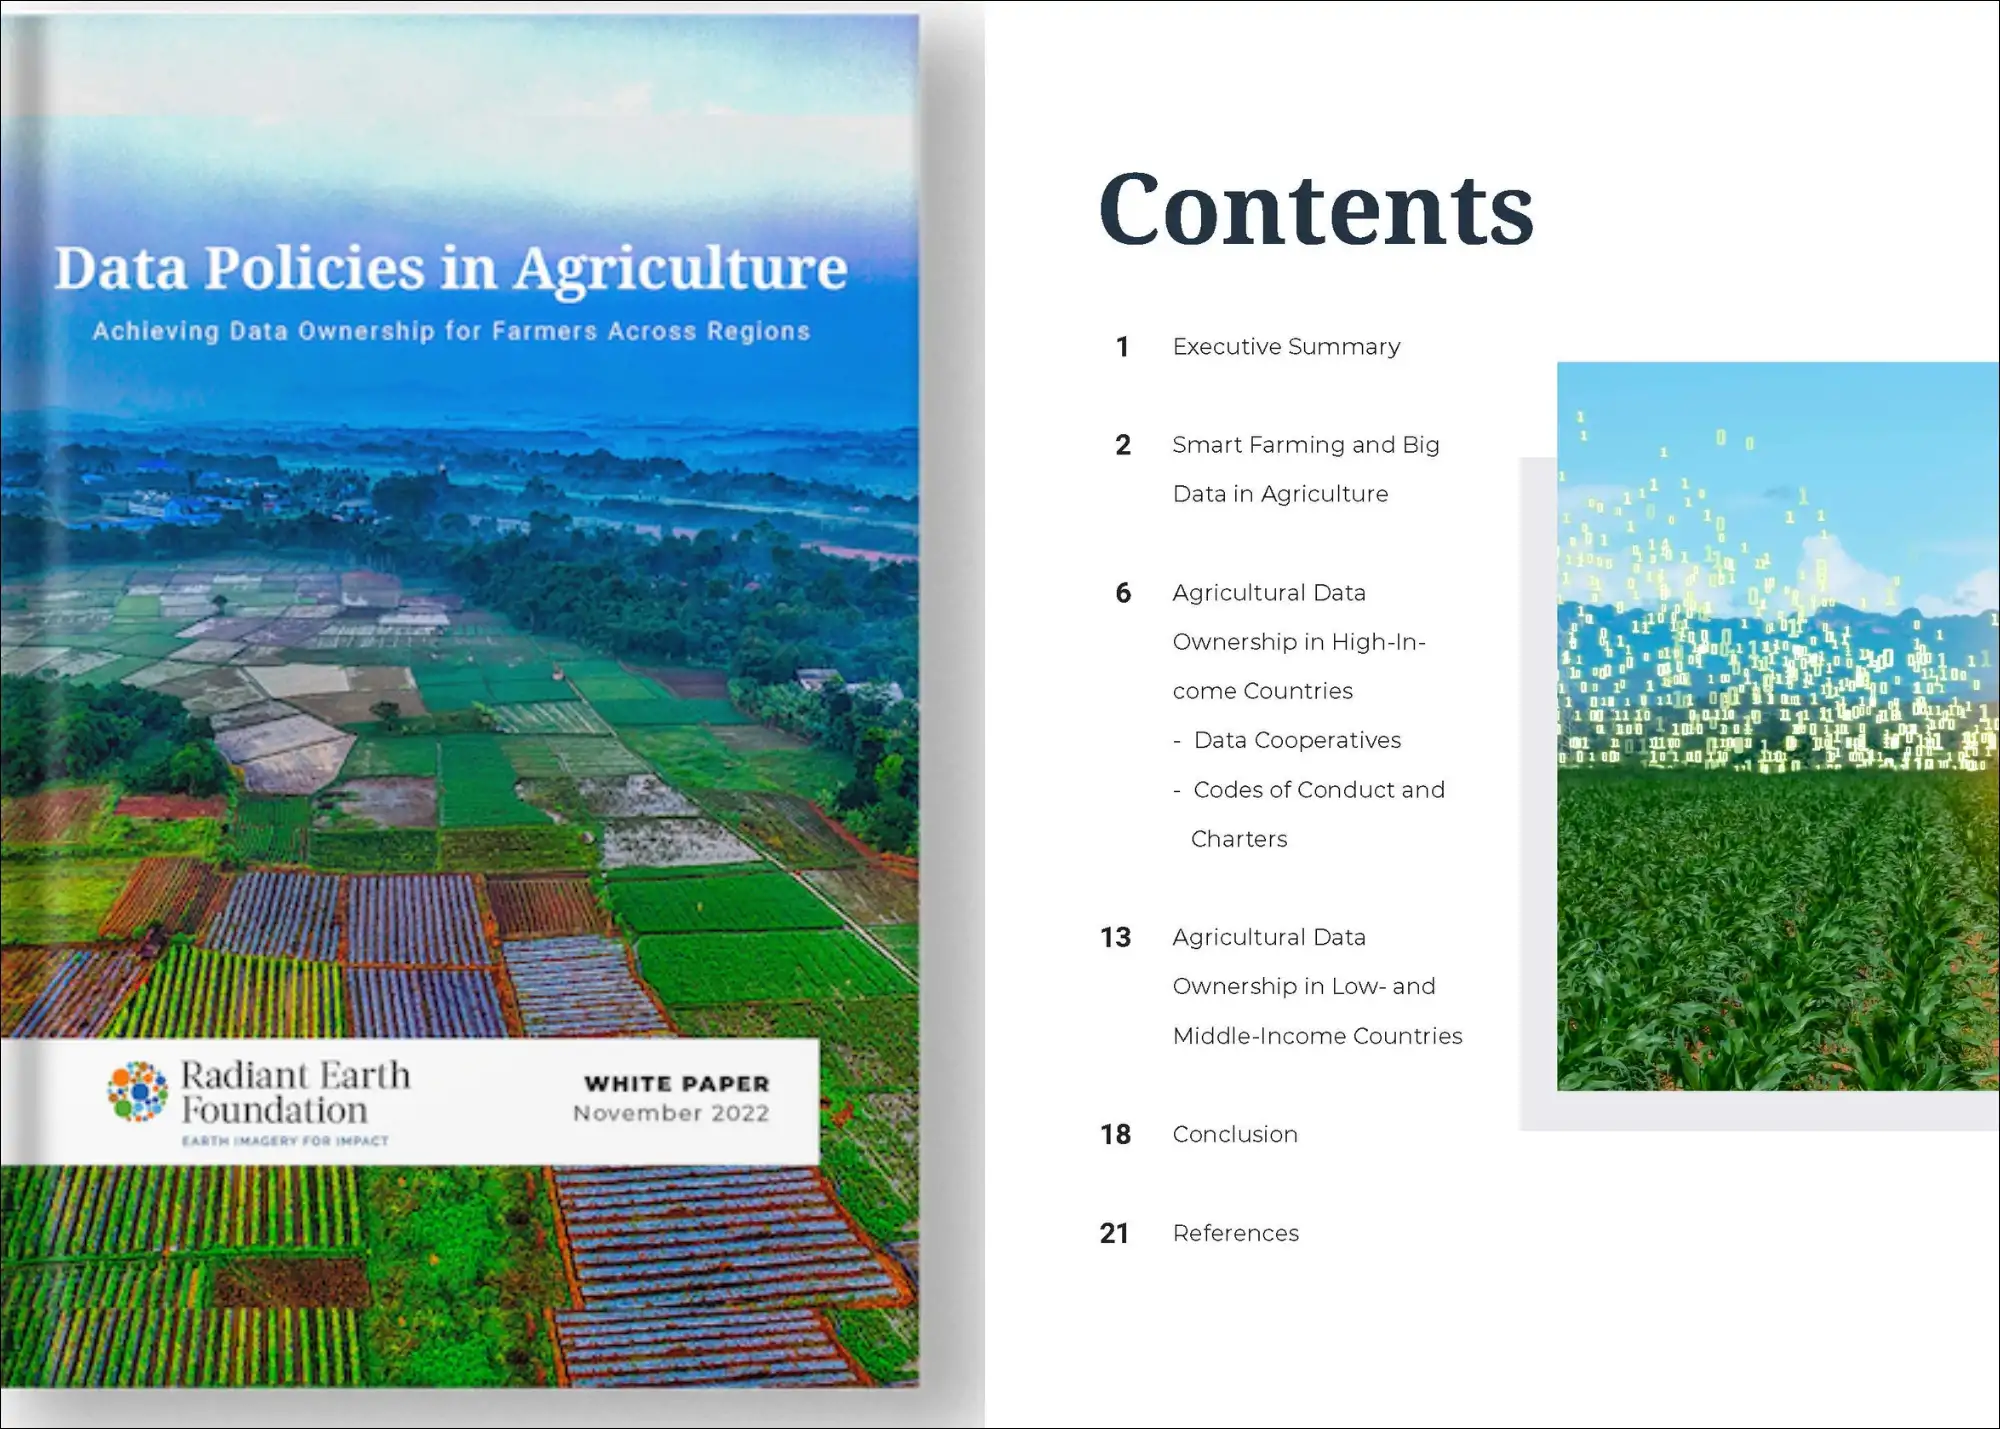 Data Policies in Agriculture white paper